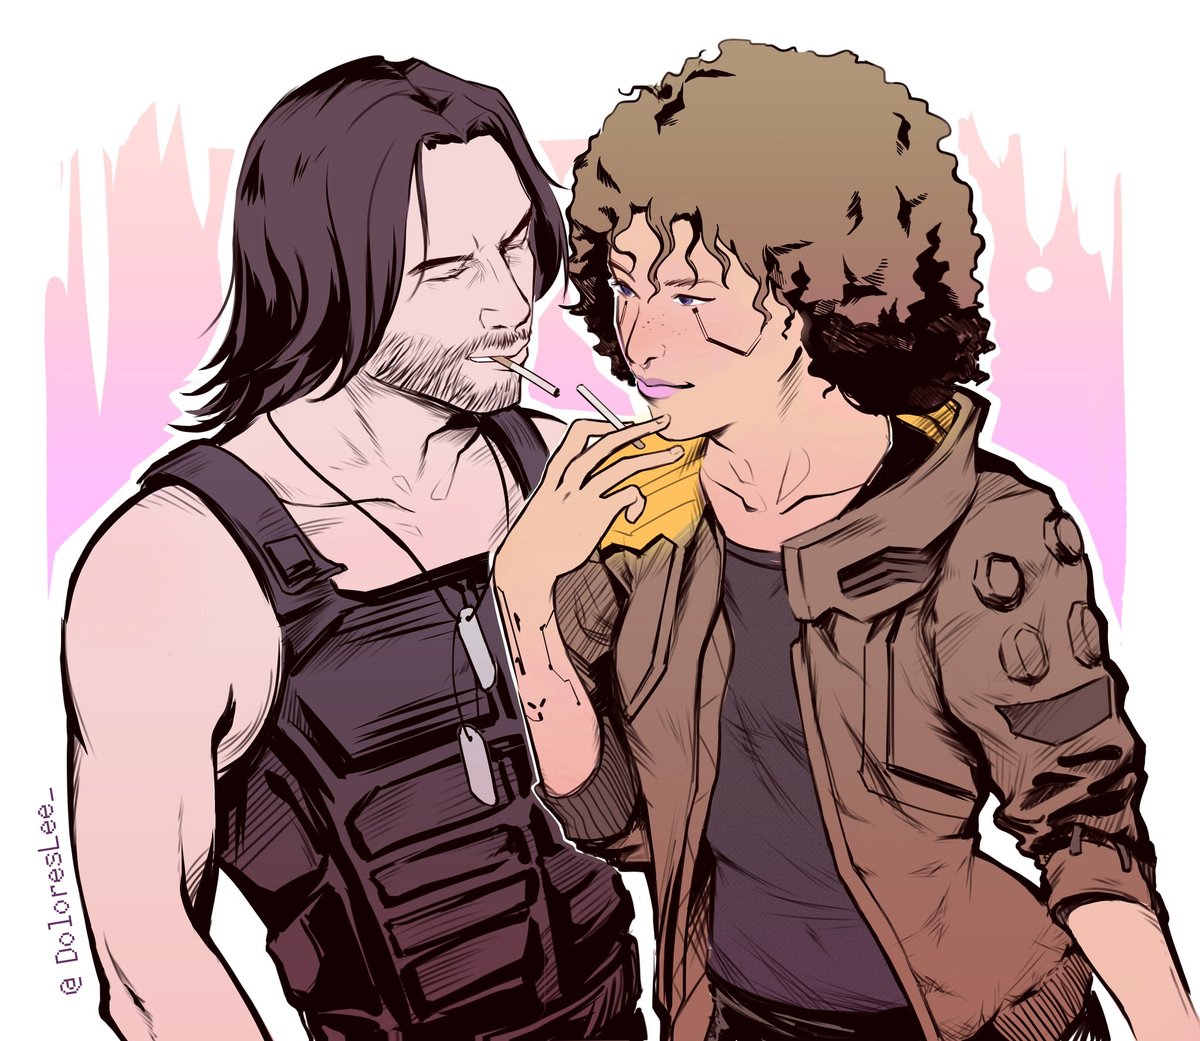 They finish each others... cigarettes. 🚬💘 Repost of one of my favs for #FanArtFriday by the incredible @DoloresLee_ ❤️ I'm biased but her Keanu/Johnny arts are some of absolute favs. #Cyberpunk2077 #Cyberpunk2077fanart #silverv #otpthesilverhands #johnnysilverhand #cp2077